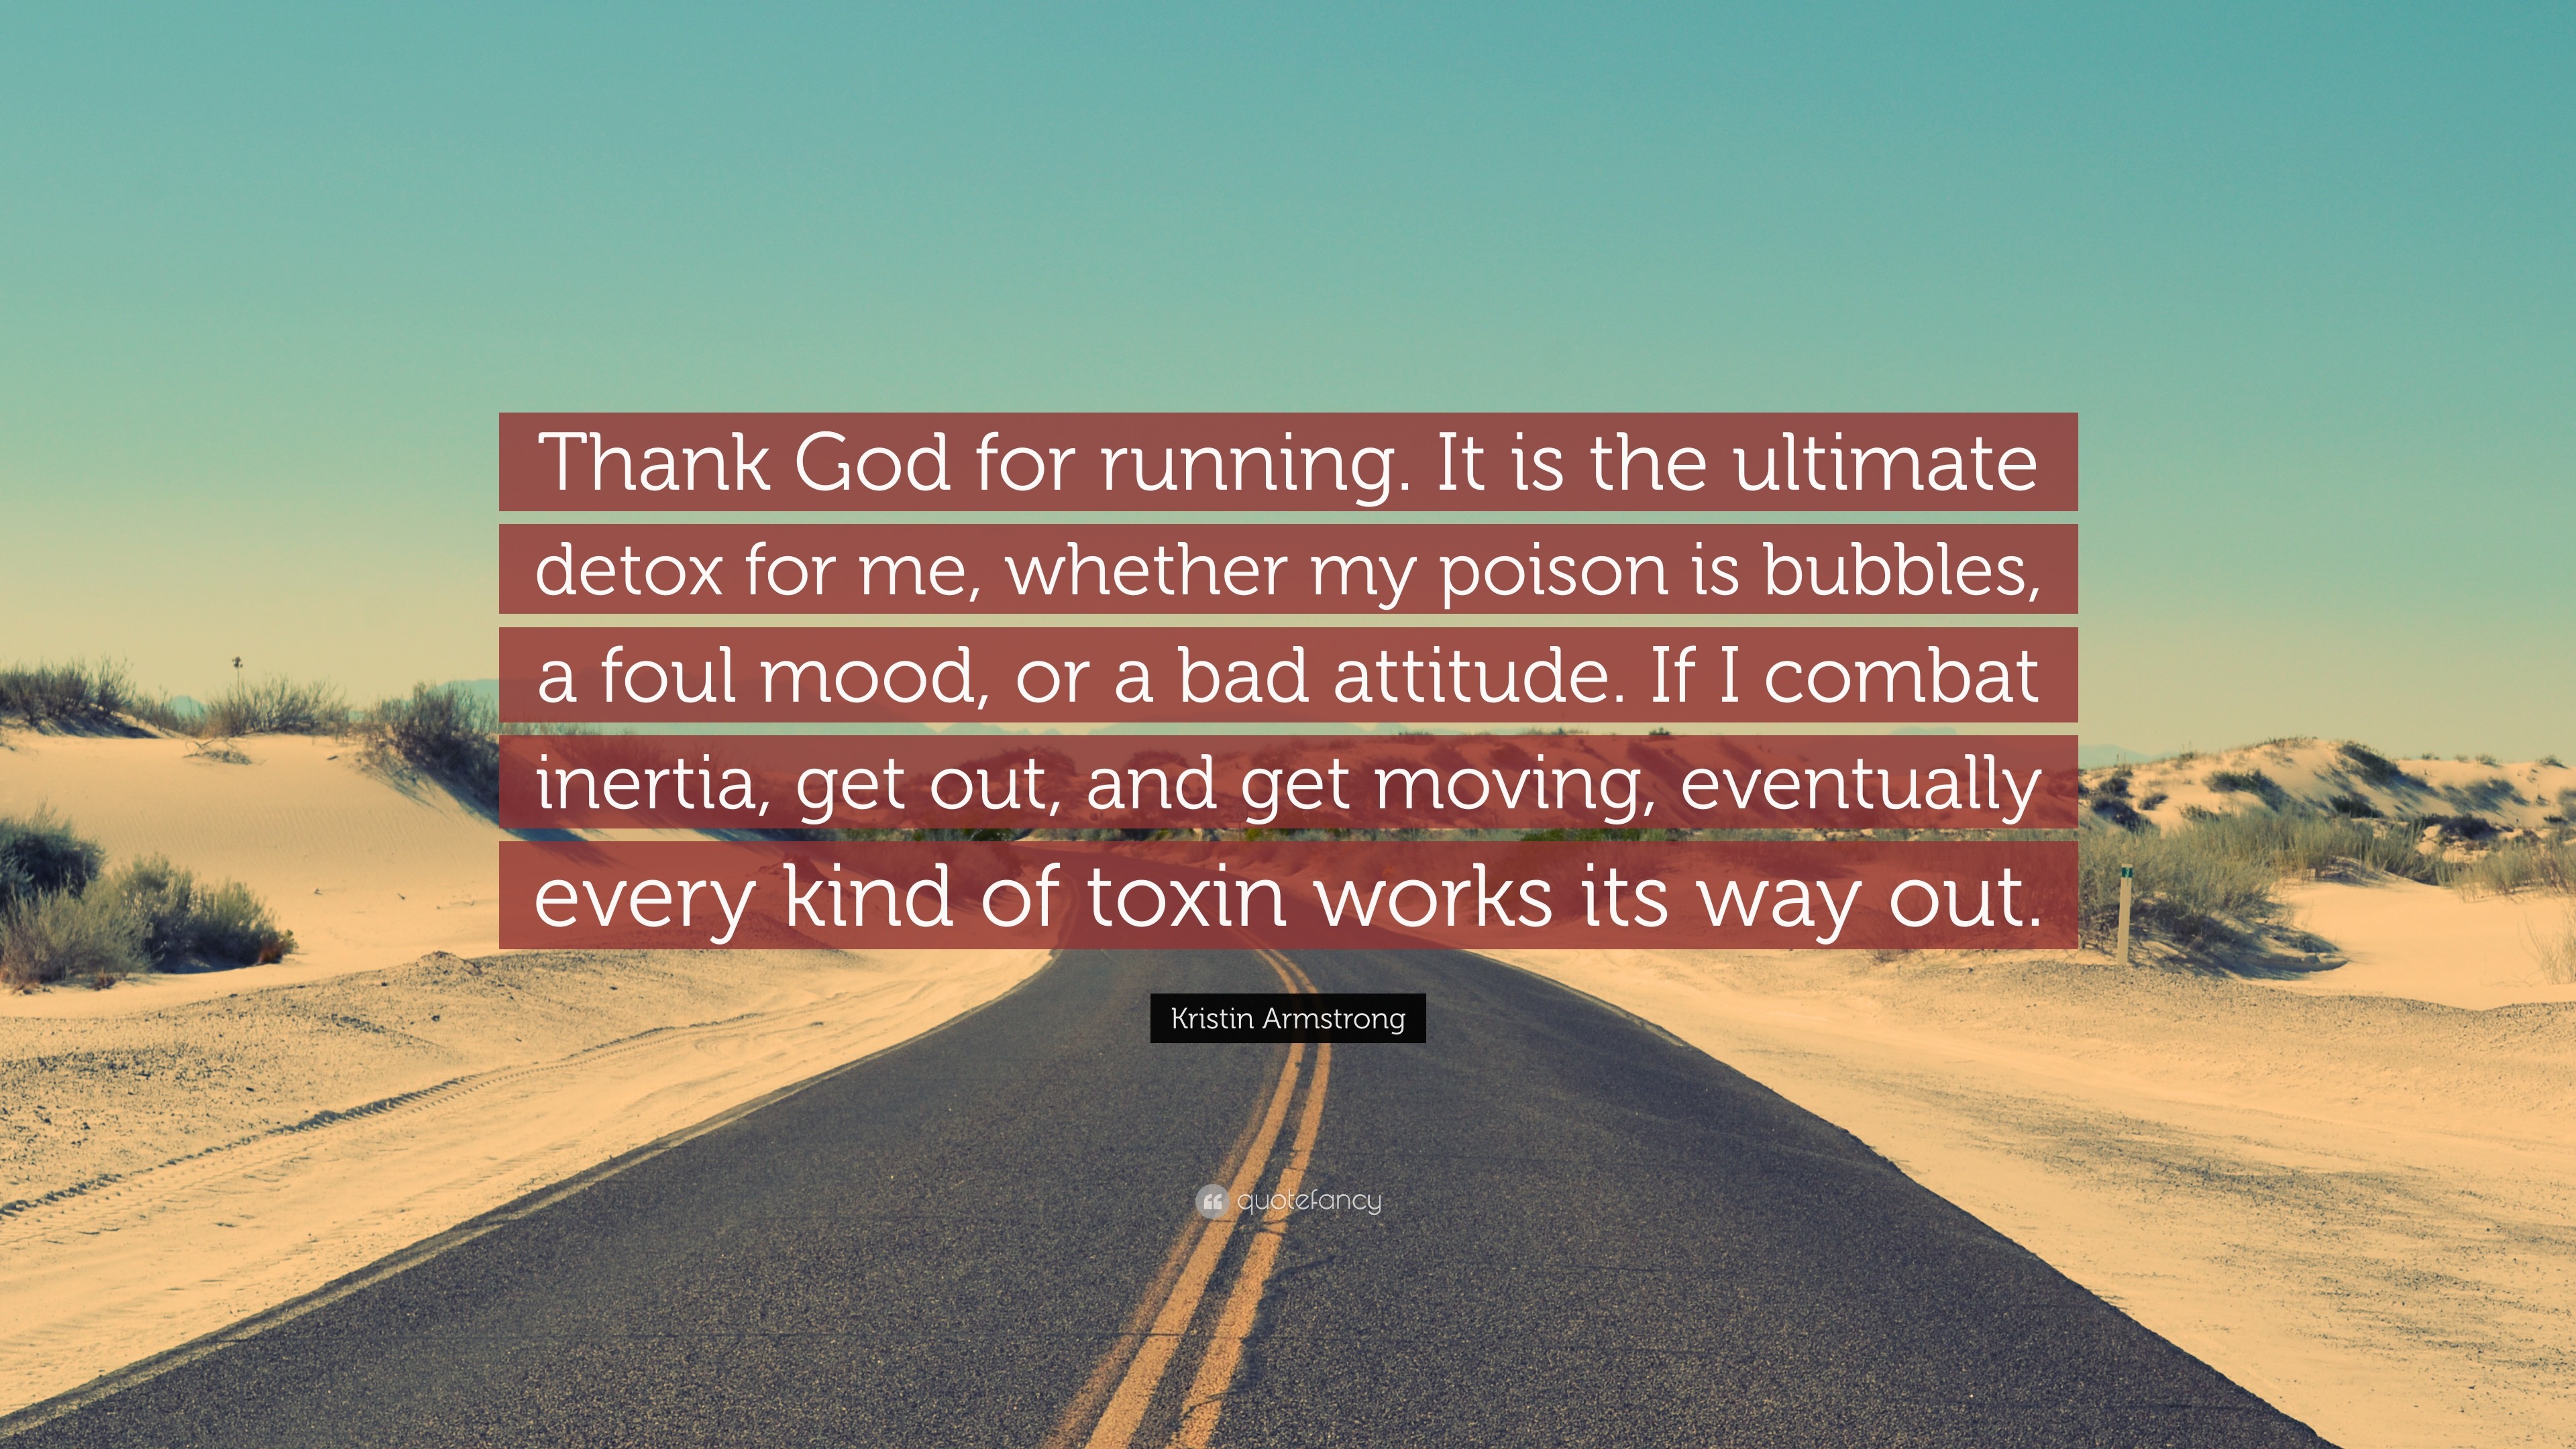 3840x2160 Kristin Armstrong Quote: “Thank God for running. It is the ultimate detox  for